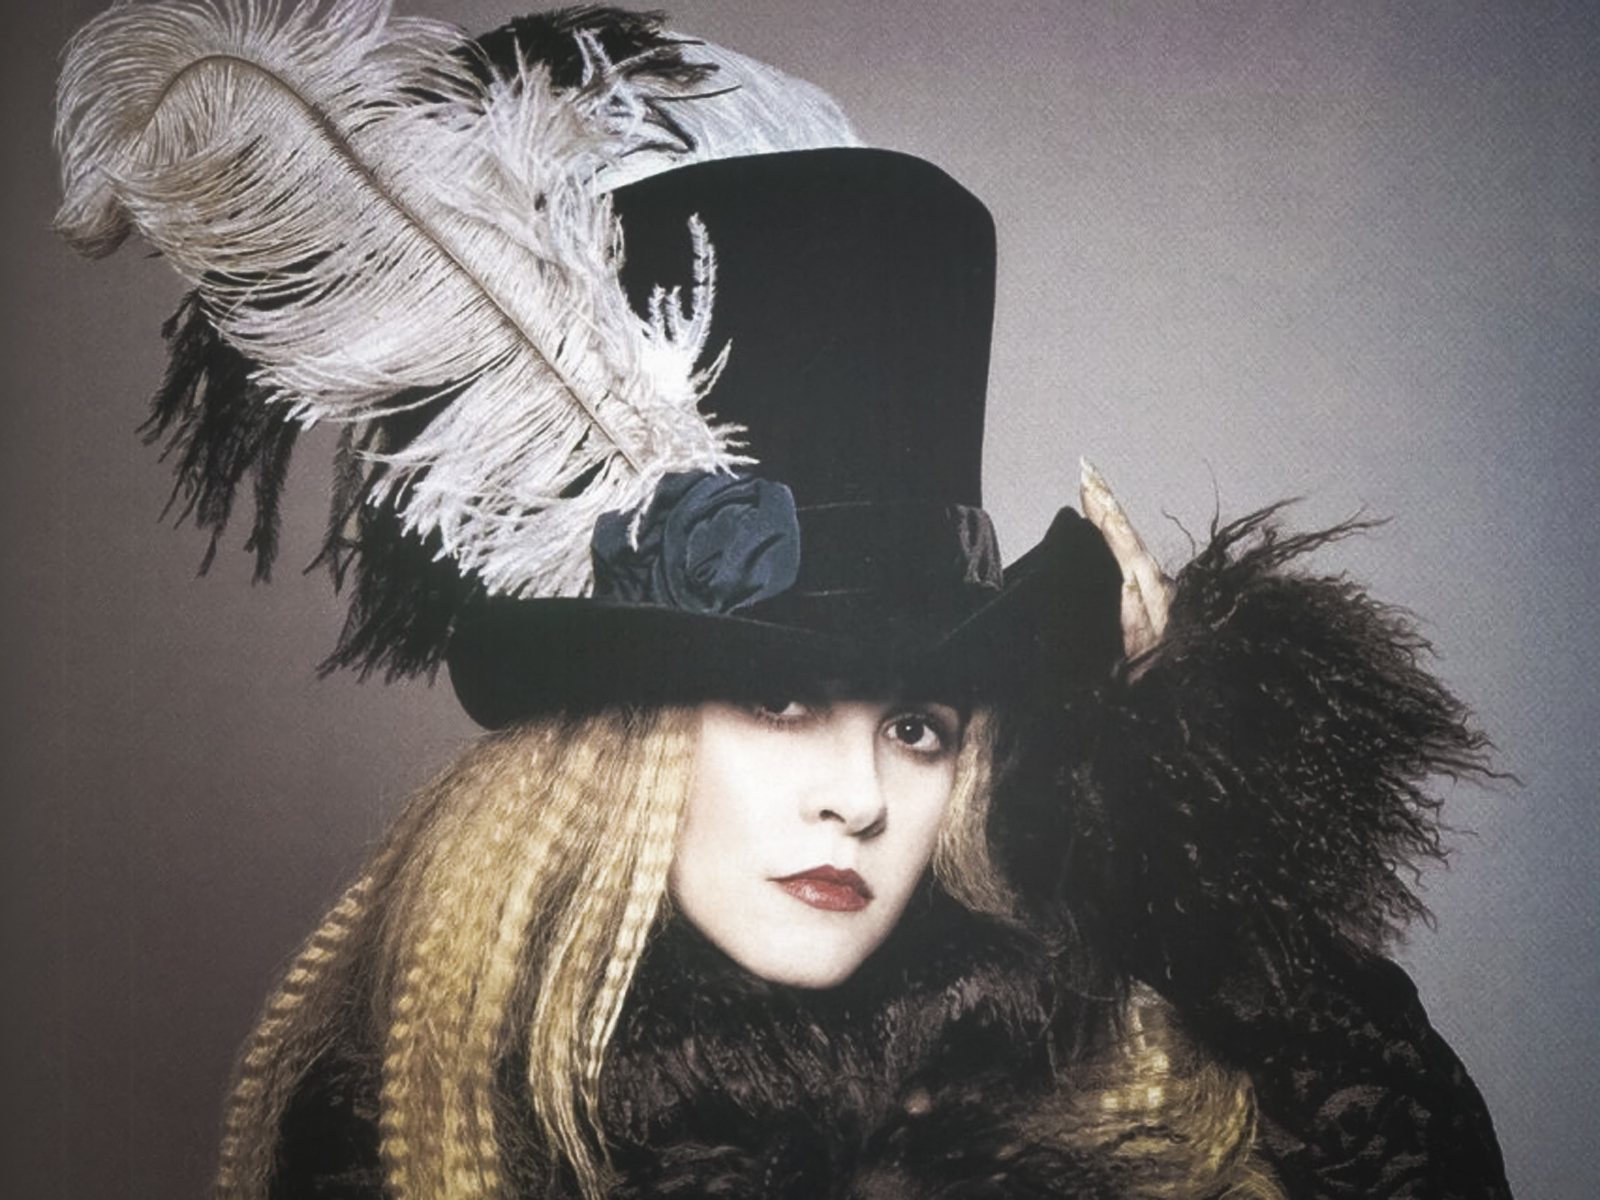 STEVIE NICKS WALLPAPERS FREE Wallpapers Background images